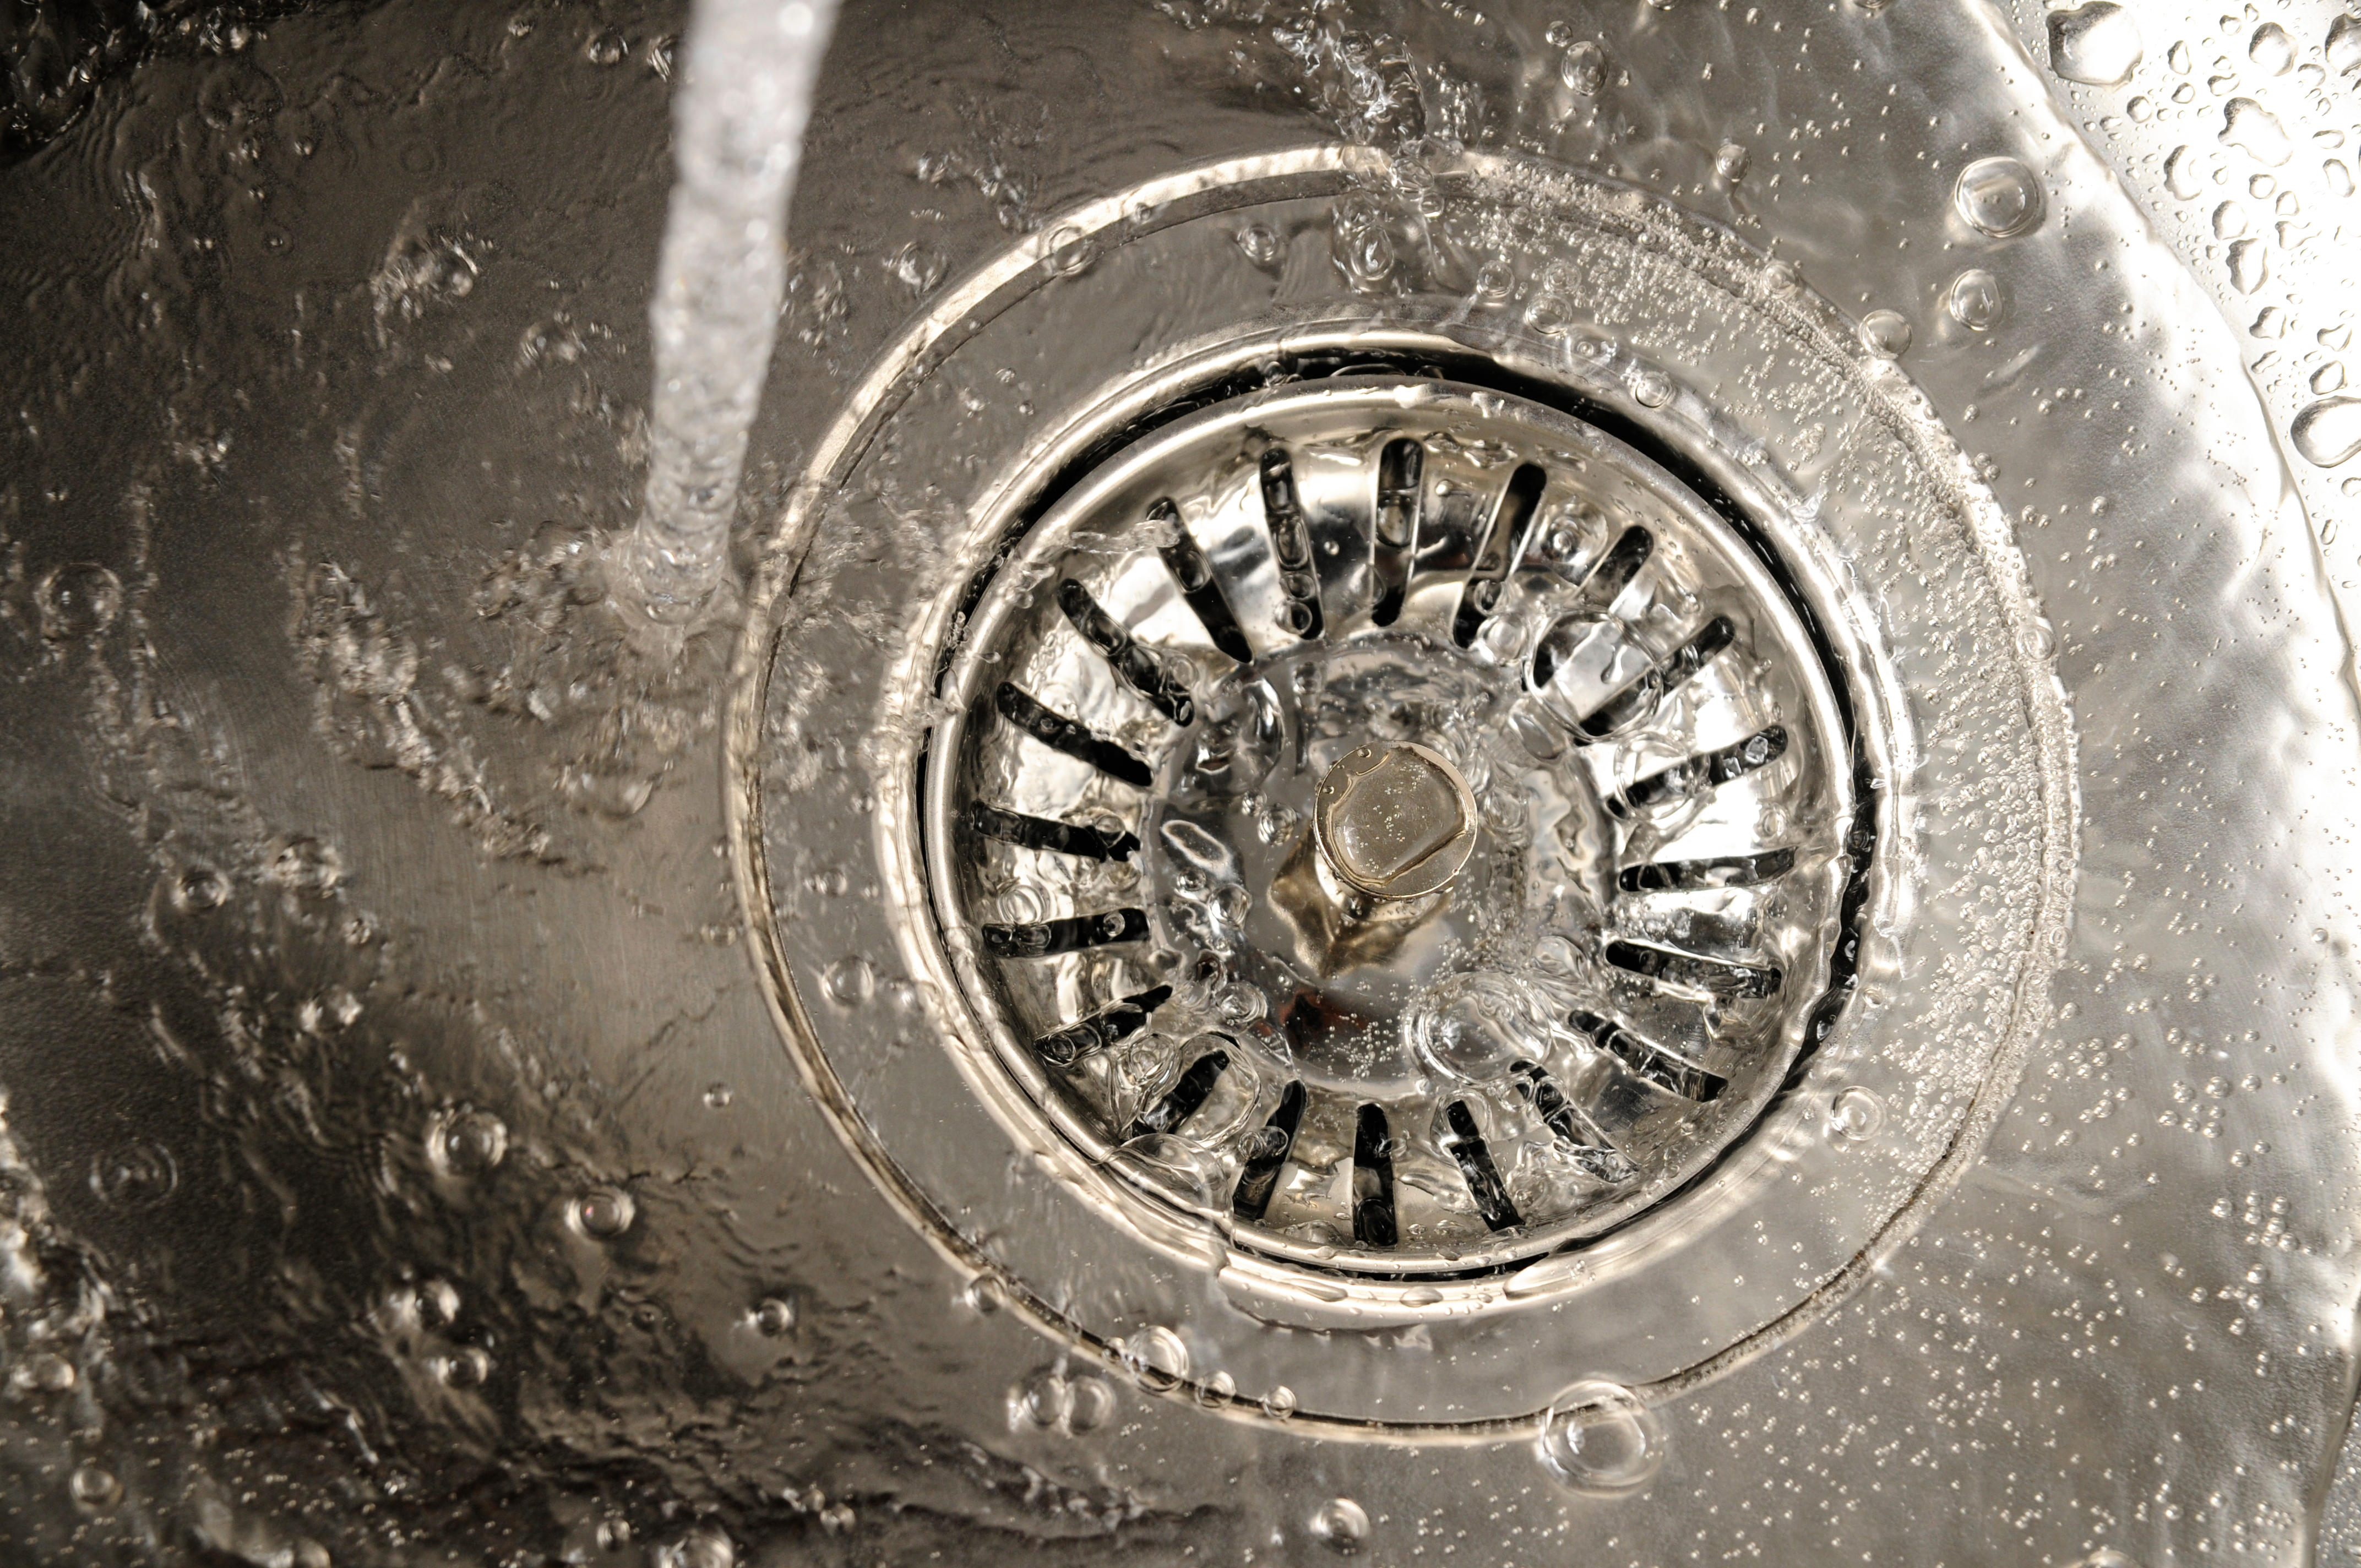 How to change a kitchen sink drain: in four easy steps